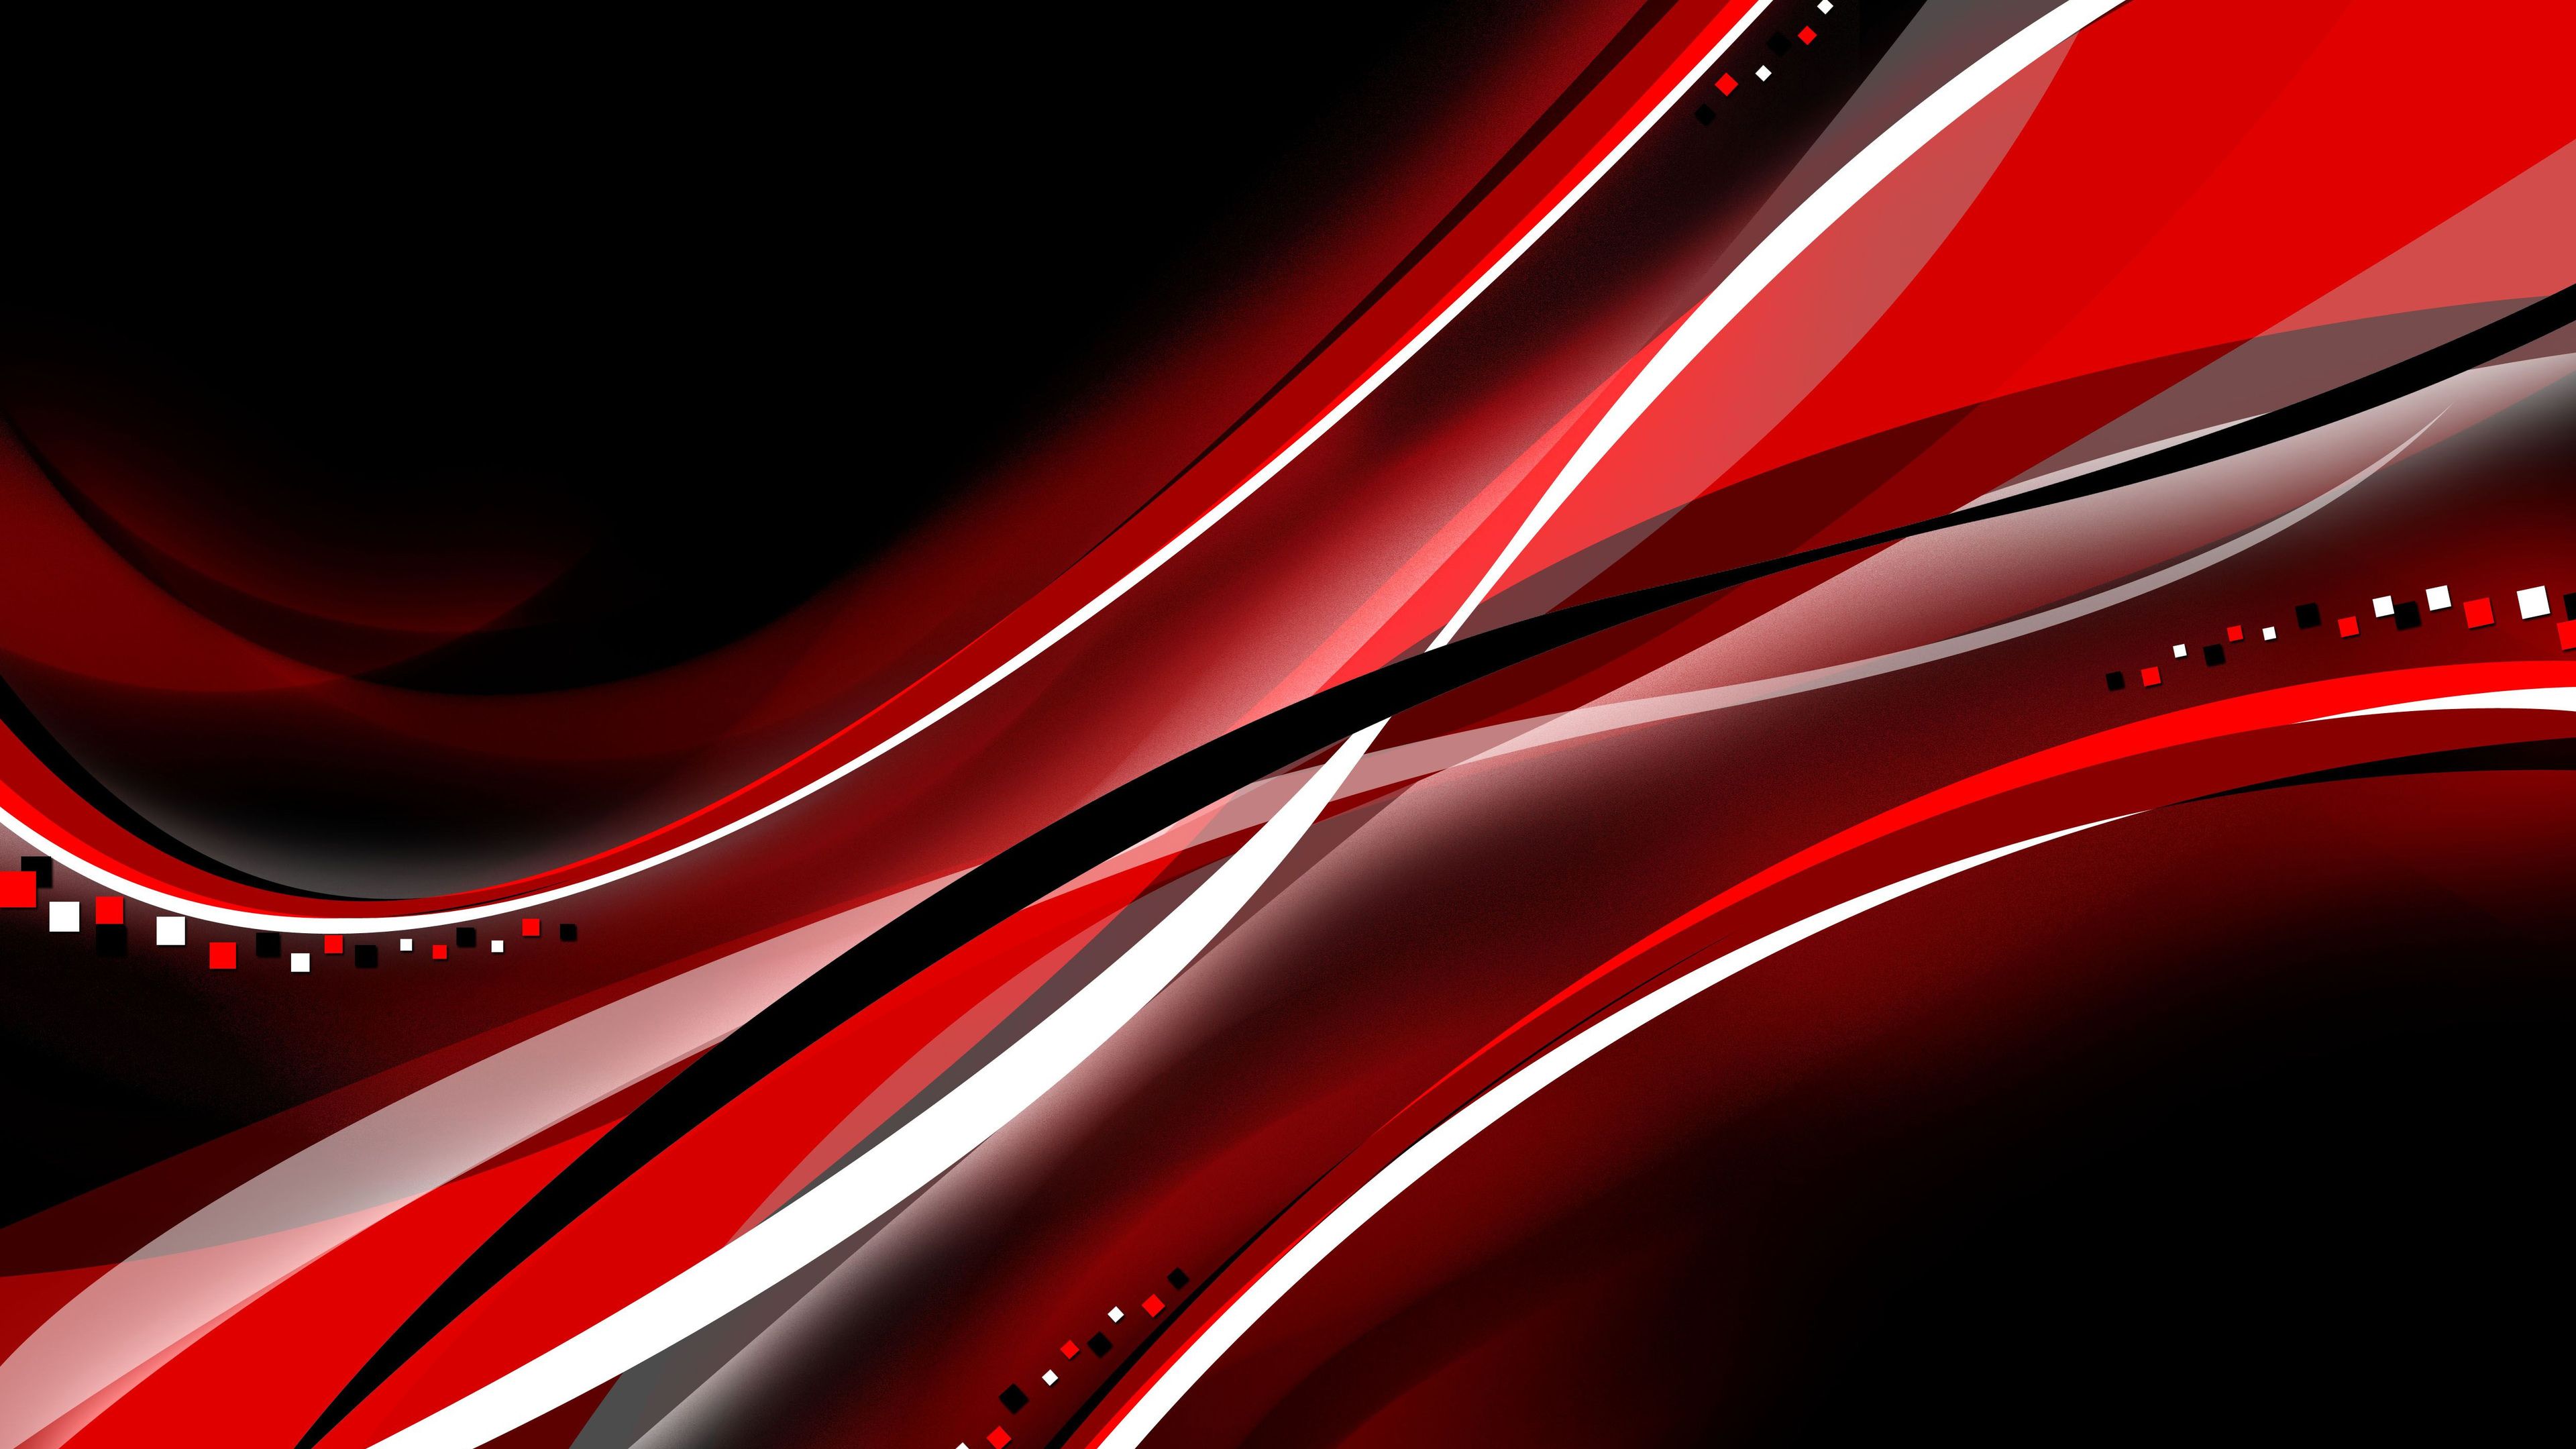 4k Resolution Ultra HD Red And Black Wallpaper iPhone